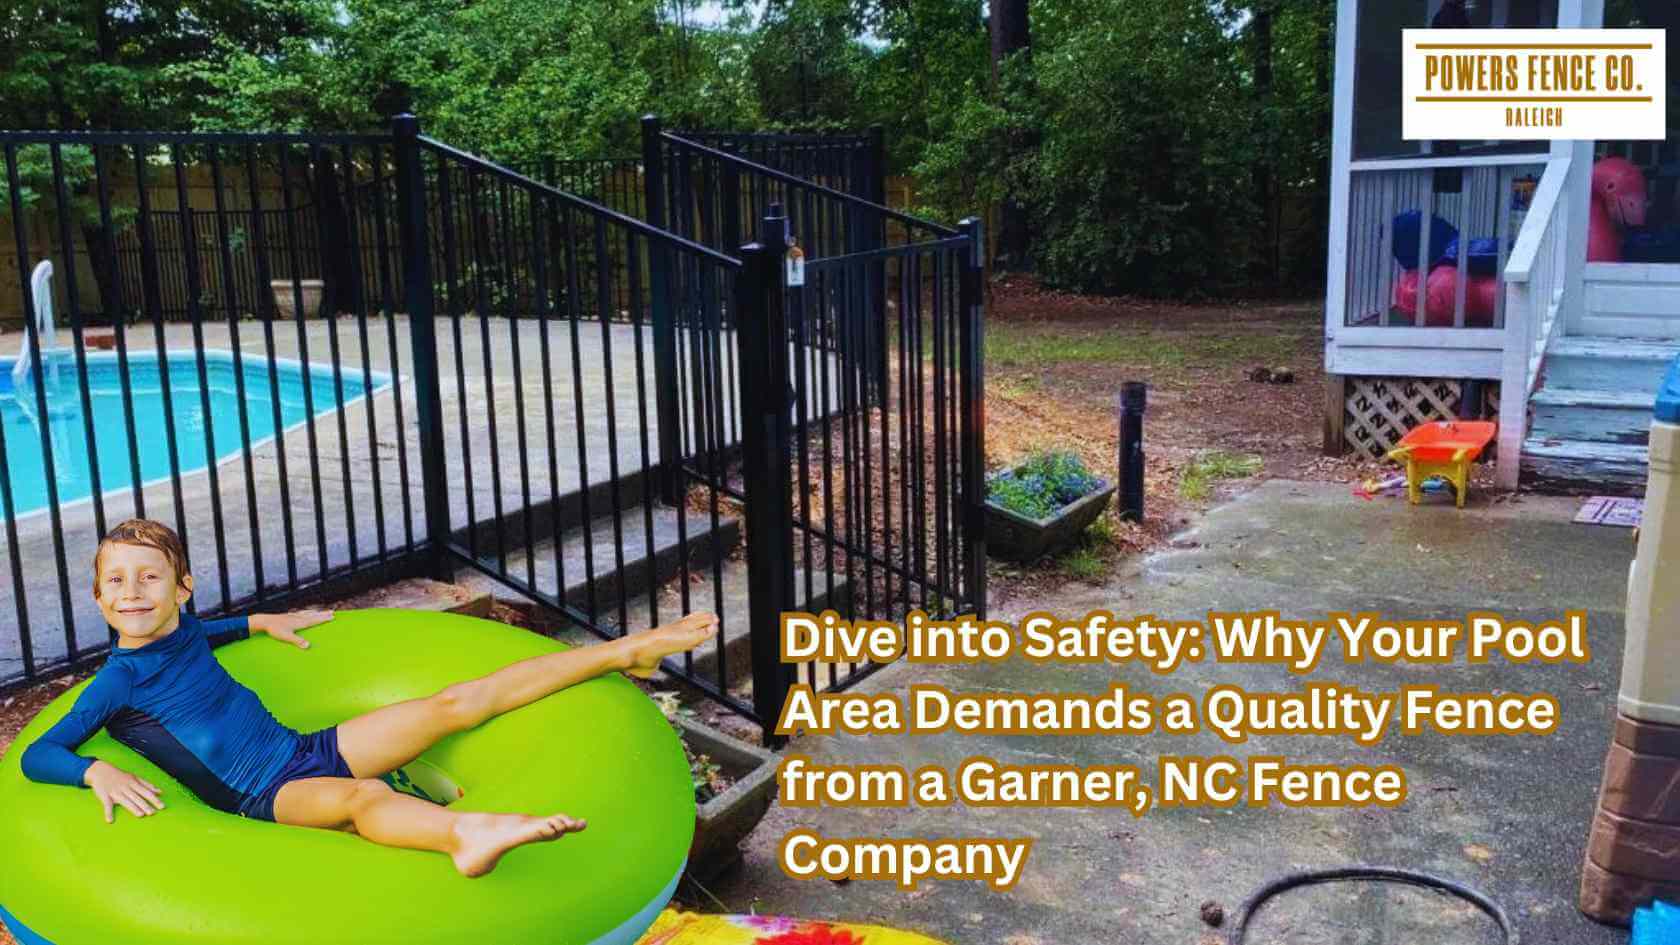 Dive into Safety: Why Your Pool Area Demands a Quality Fence from a Garner, NC Fence Company